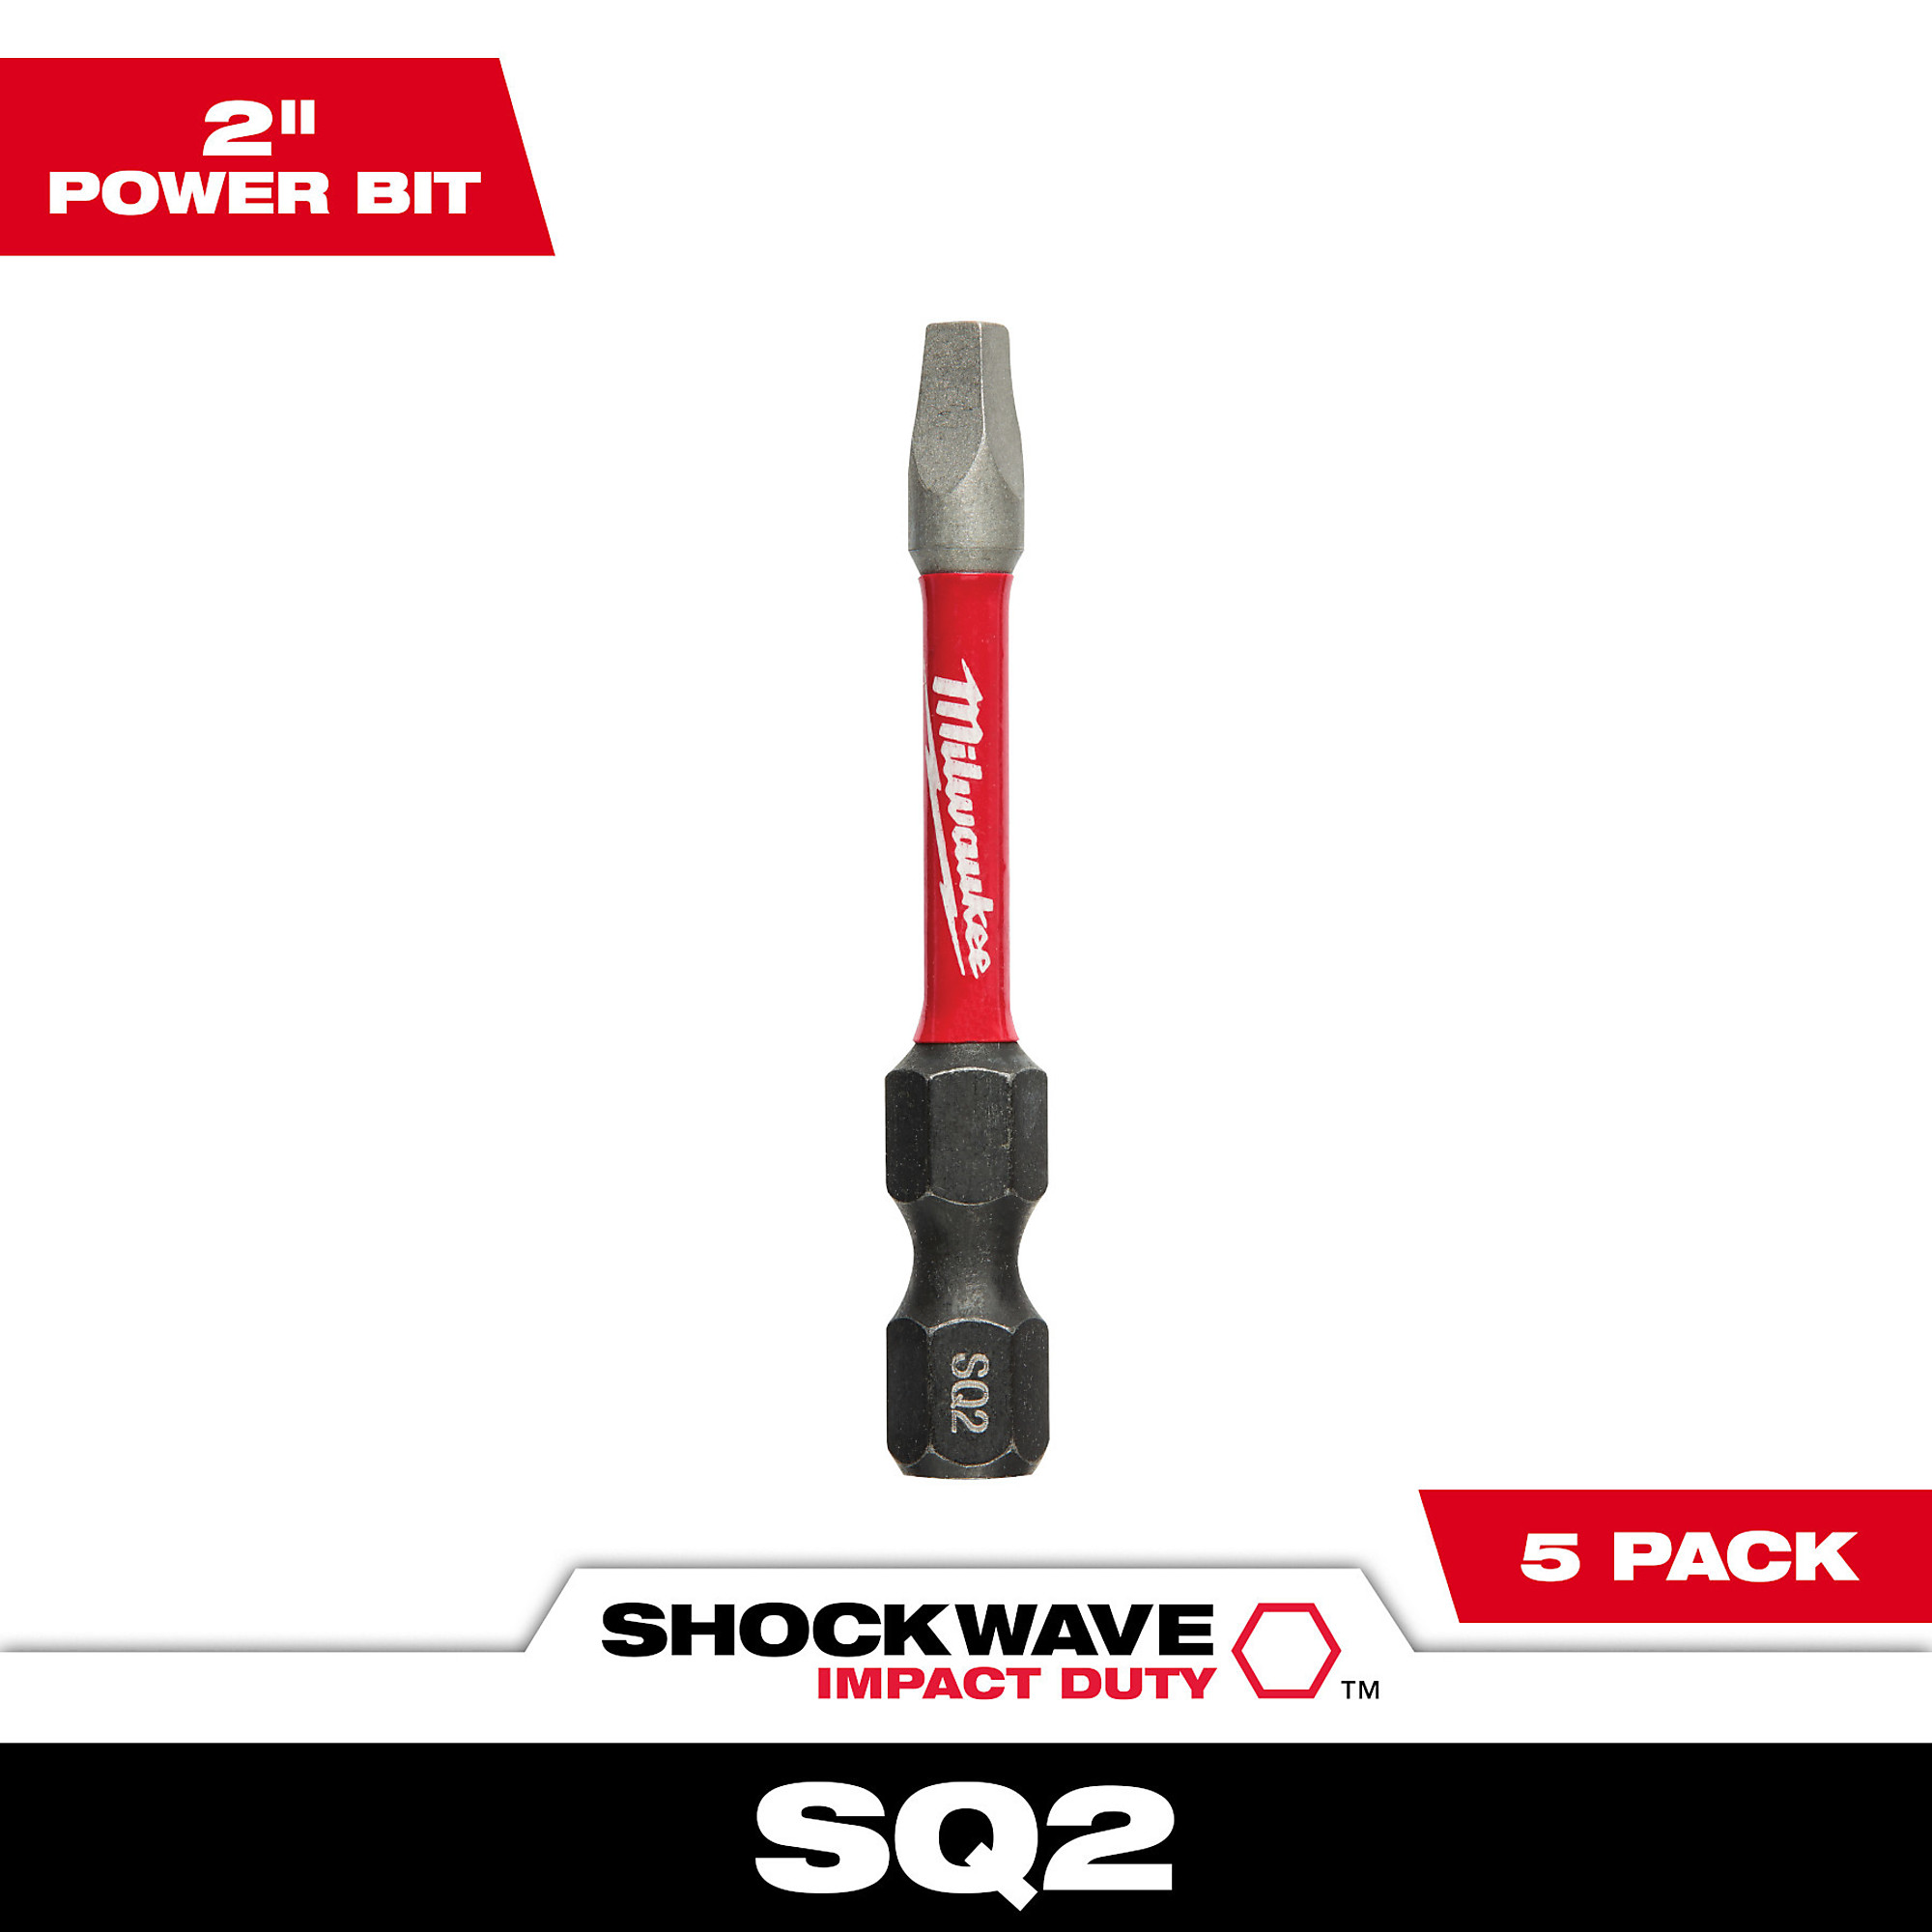 Milwaukee Shockwave Impact Duty Driver Bit, 5-Pack, 2in., Square SQ2,  Model# 48-32-4606